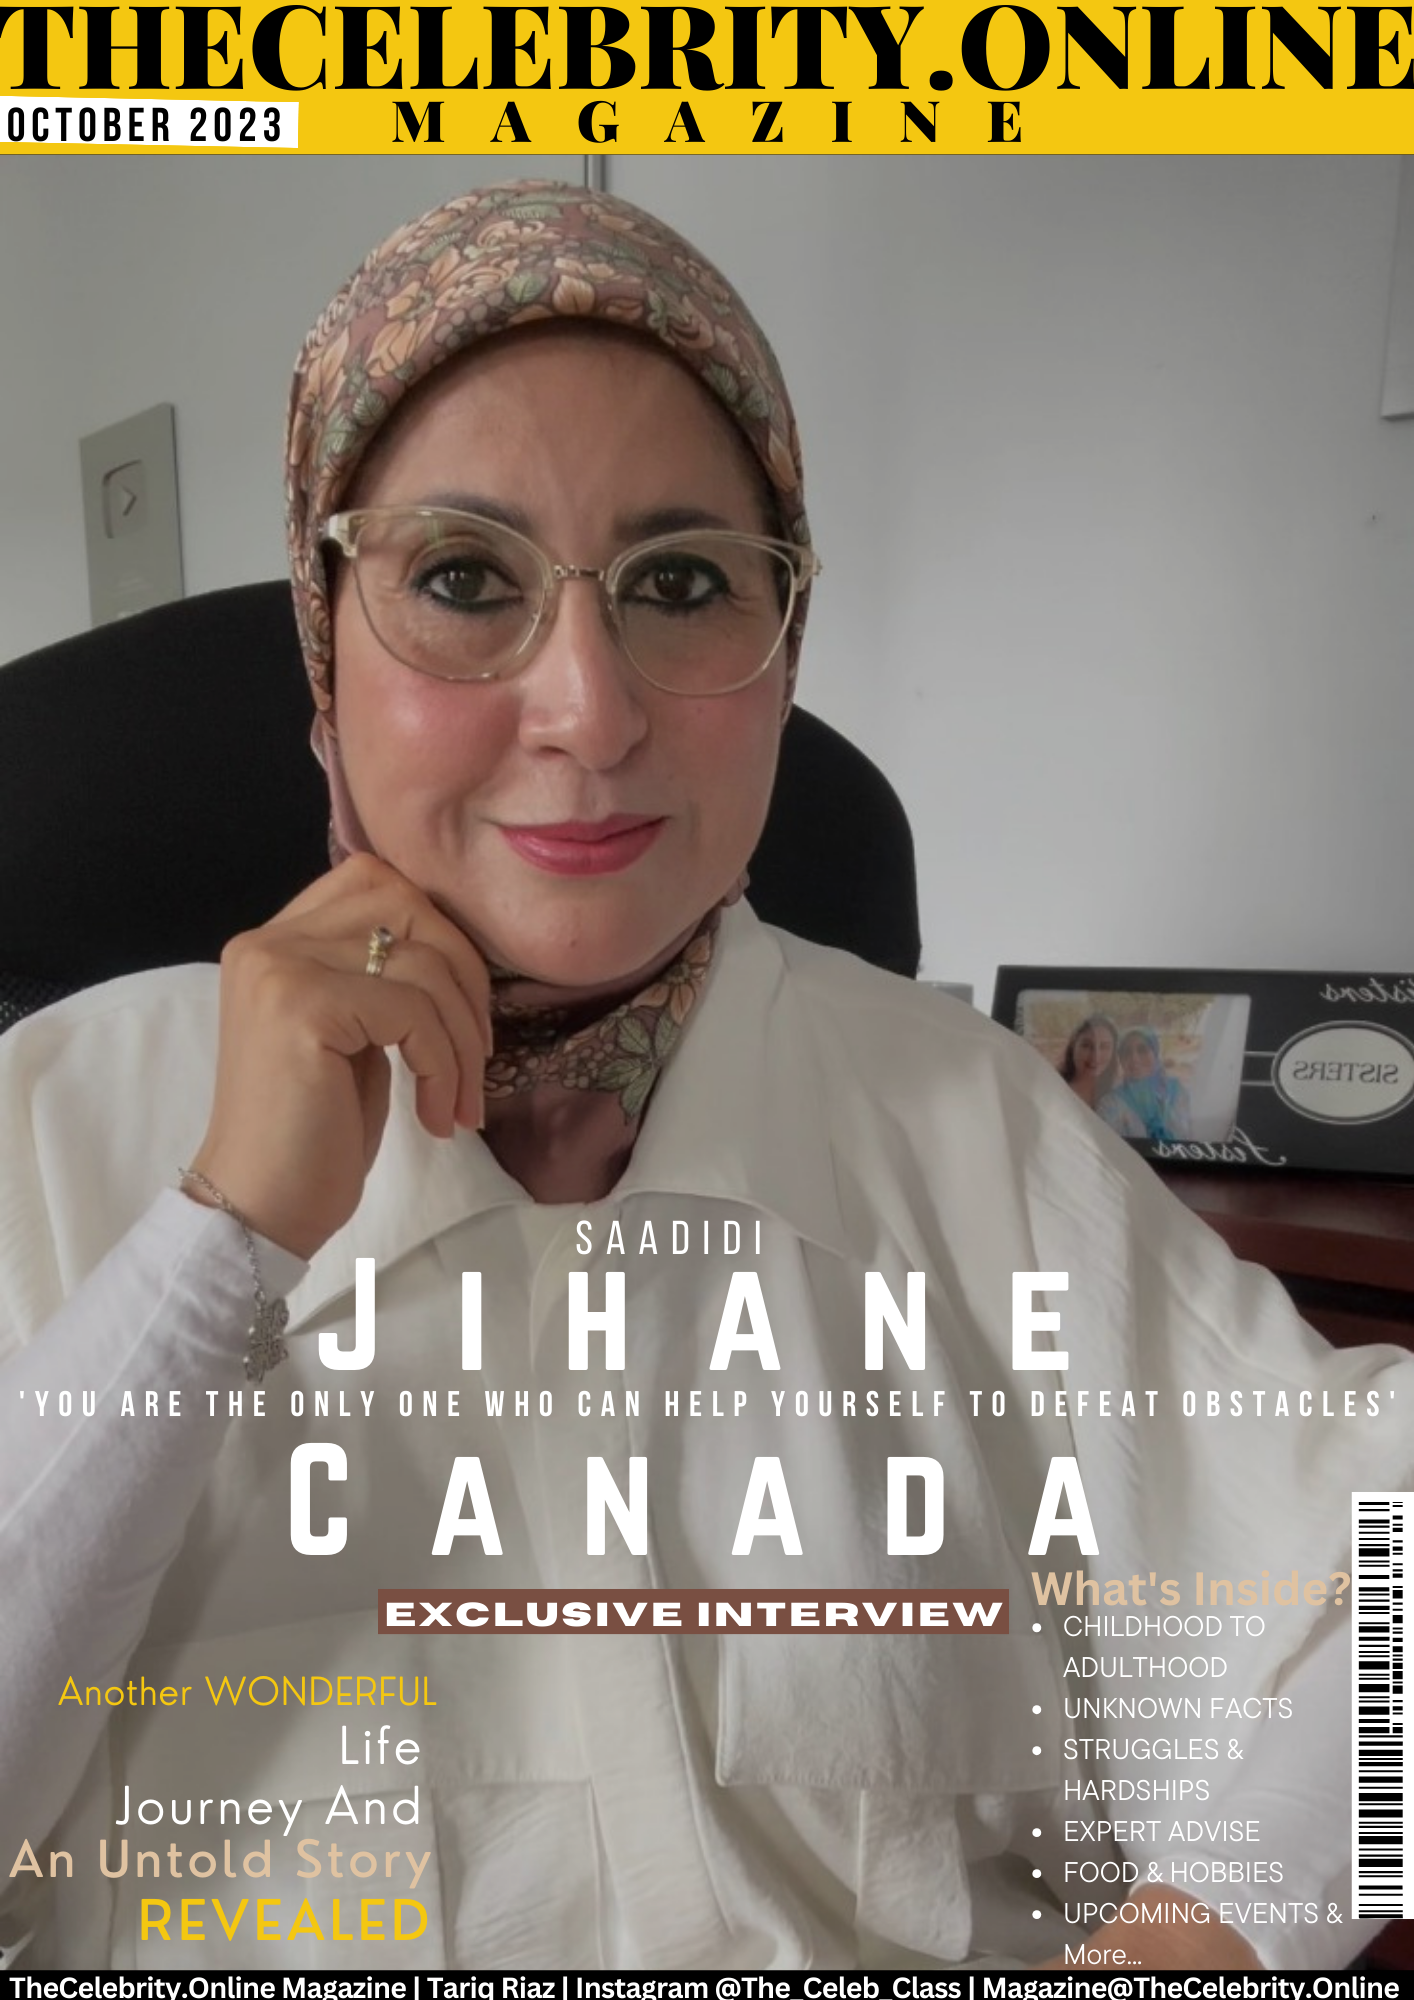 Jihane Canada Exclusive Interview – ‘You Are The Only One Who Can Help Yourself To Defeat Obstacles’